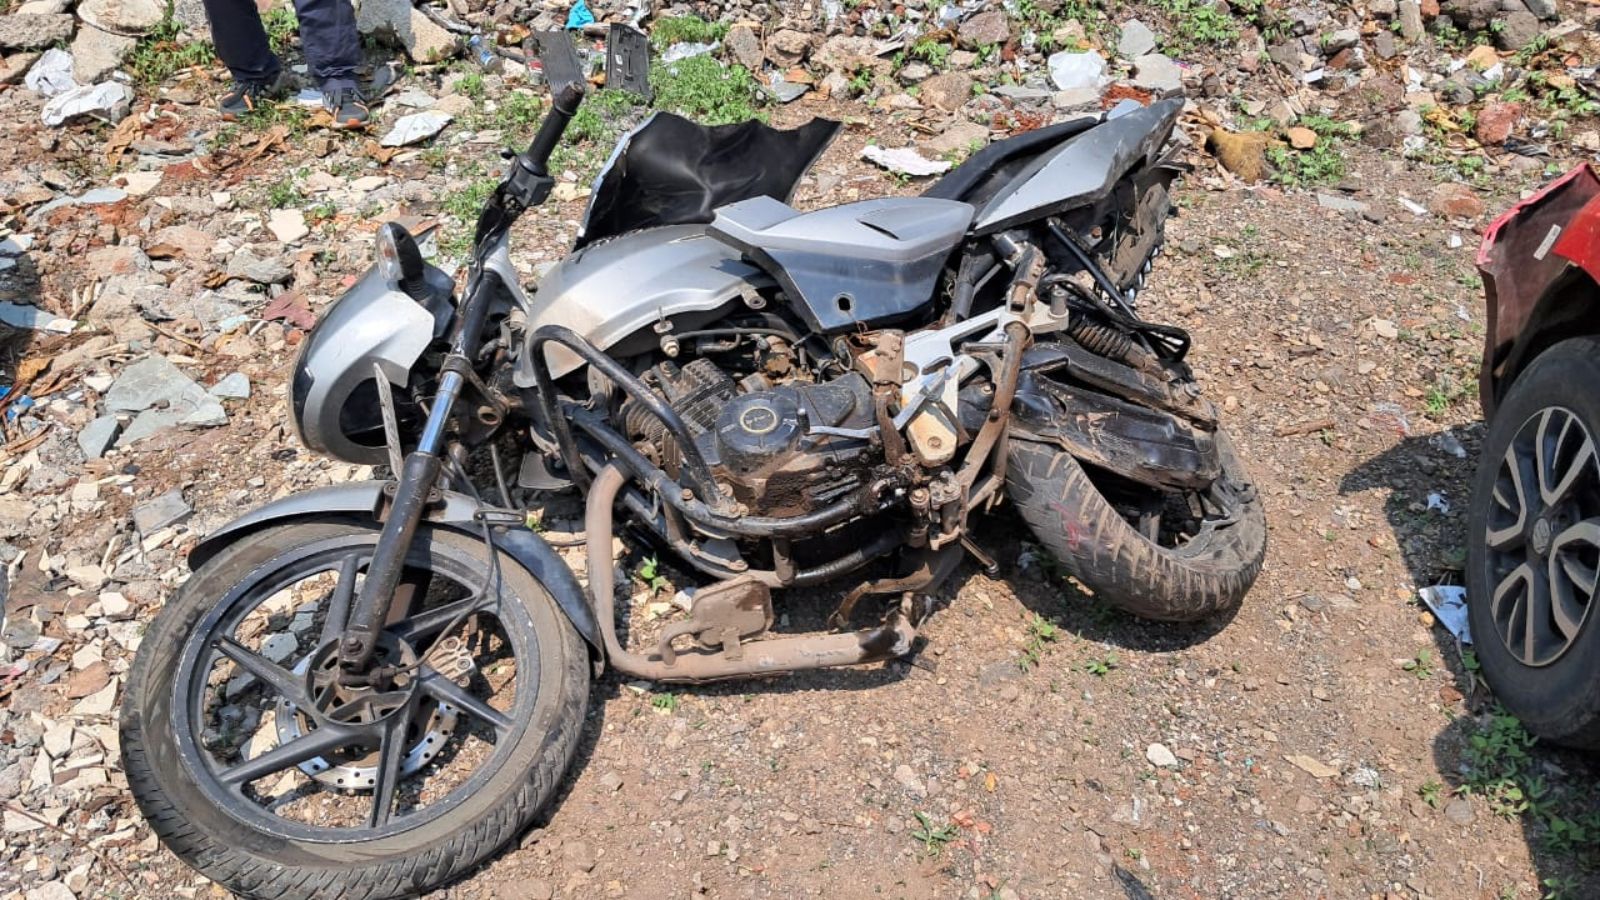 The speeding luxury car knocked down the motorcycle. (Express photo)